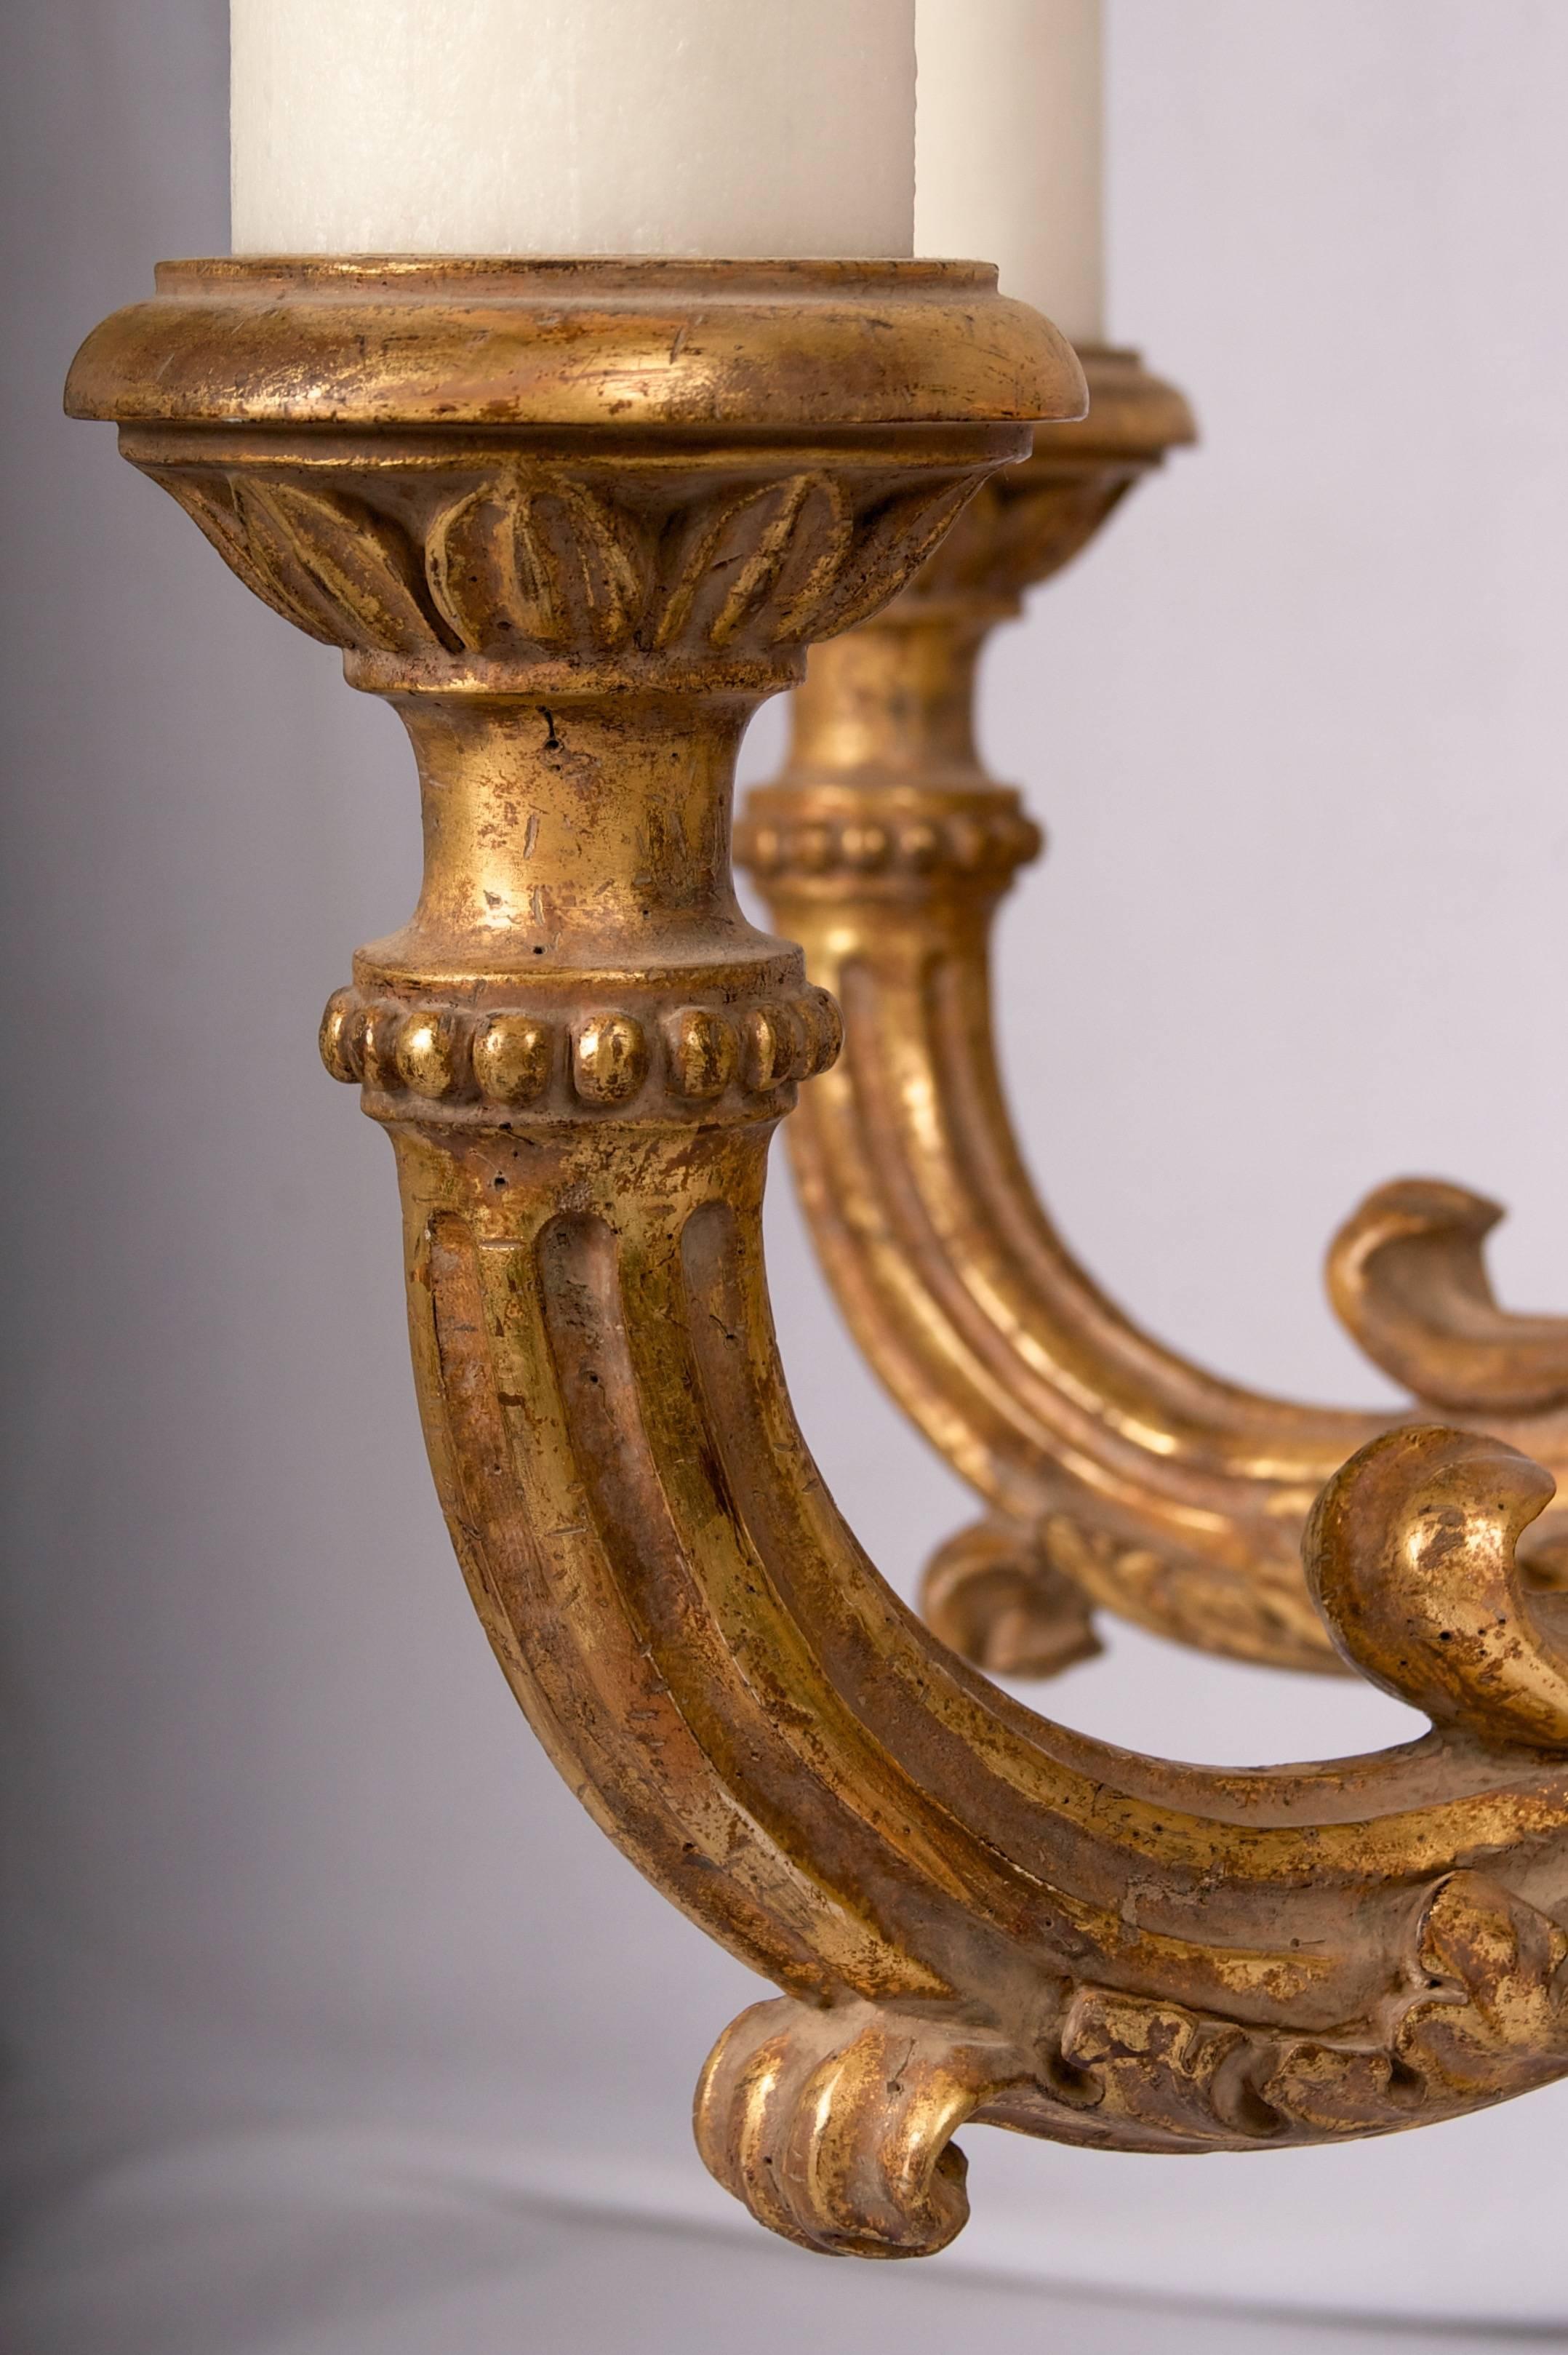 A very substantial hand-carved and gilded chandelier with wonderful wax
candle sleeves and great balanced form.